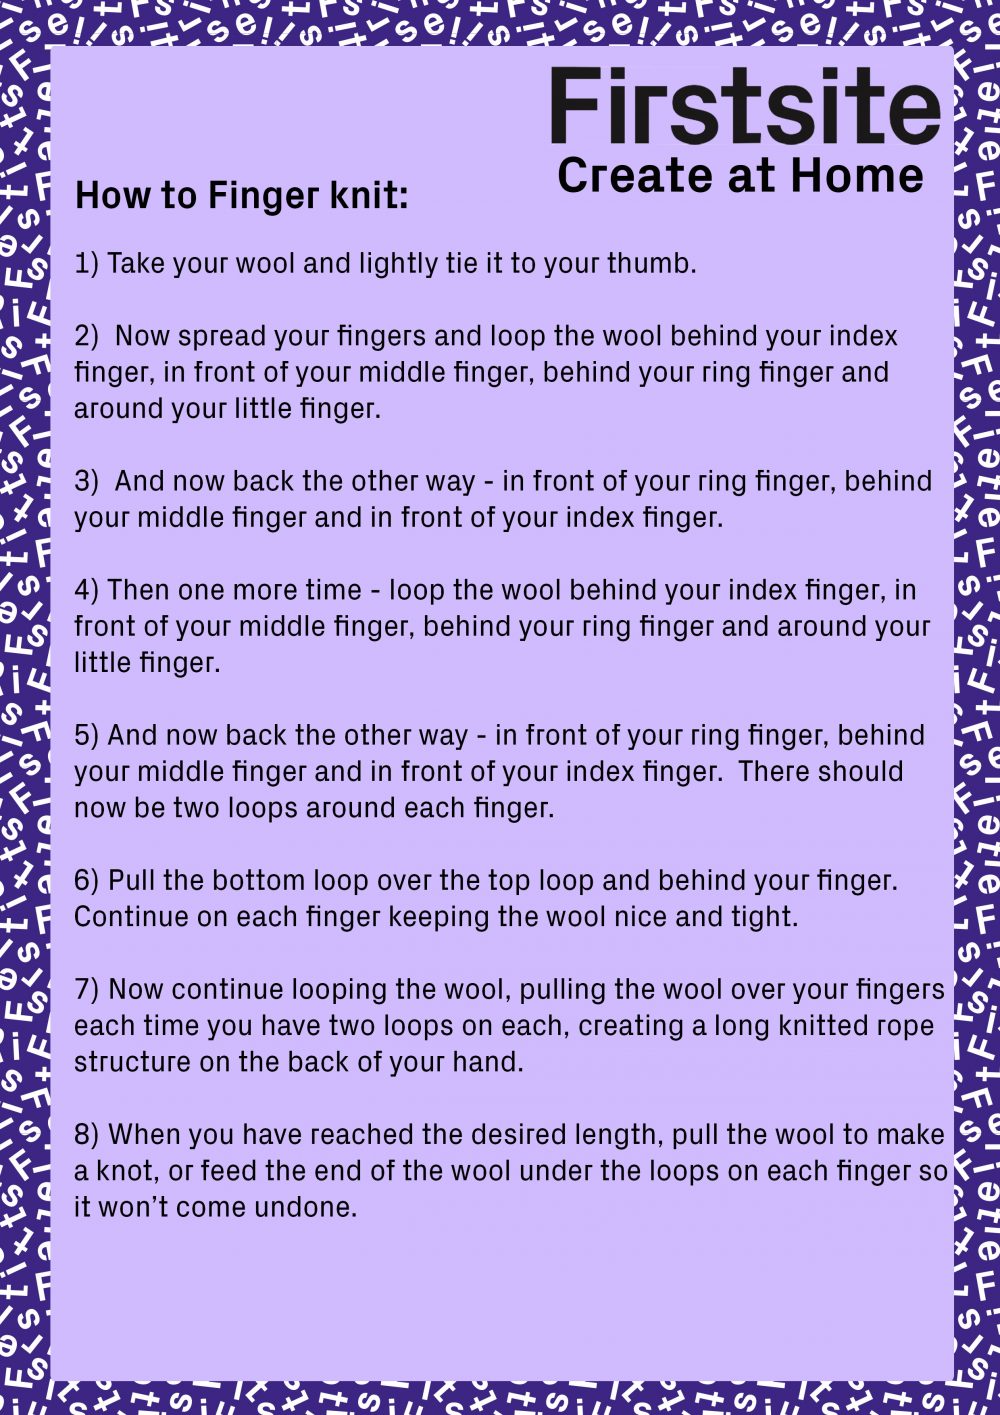 Instructions for finger knitting page 2 of 3